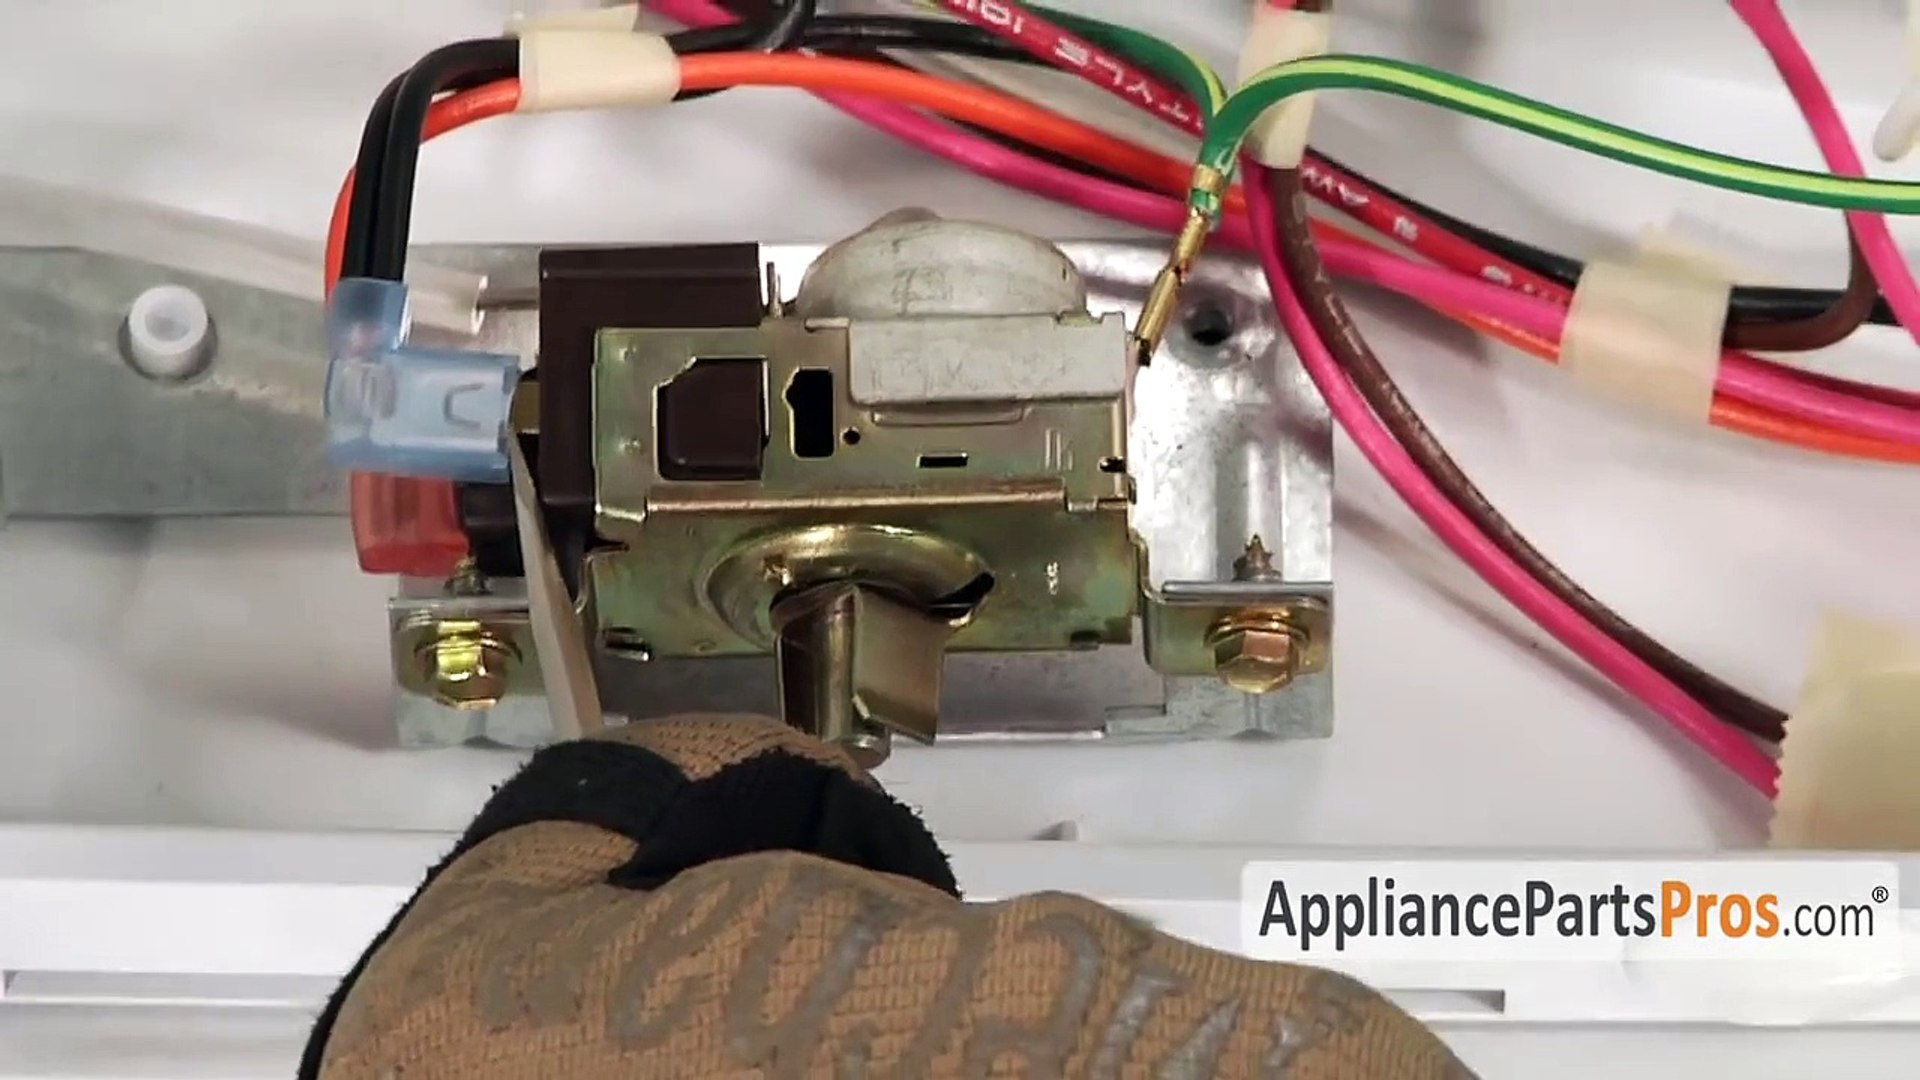 Refrigerator Thermostat (part #2198202)-How To Replace - video